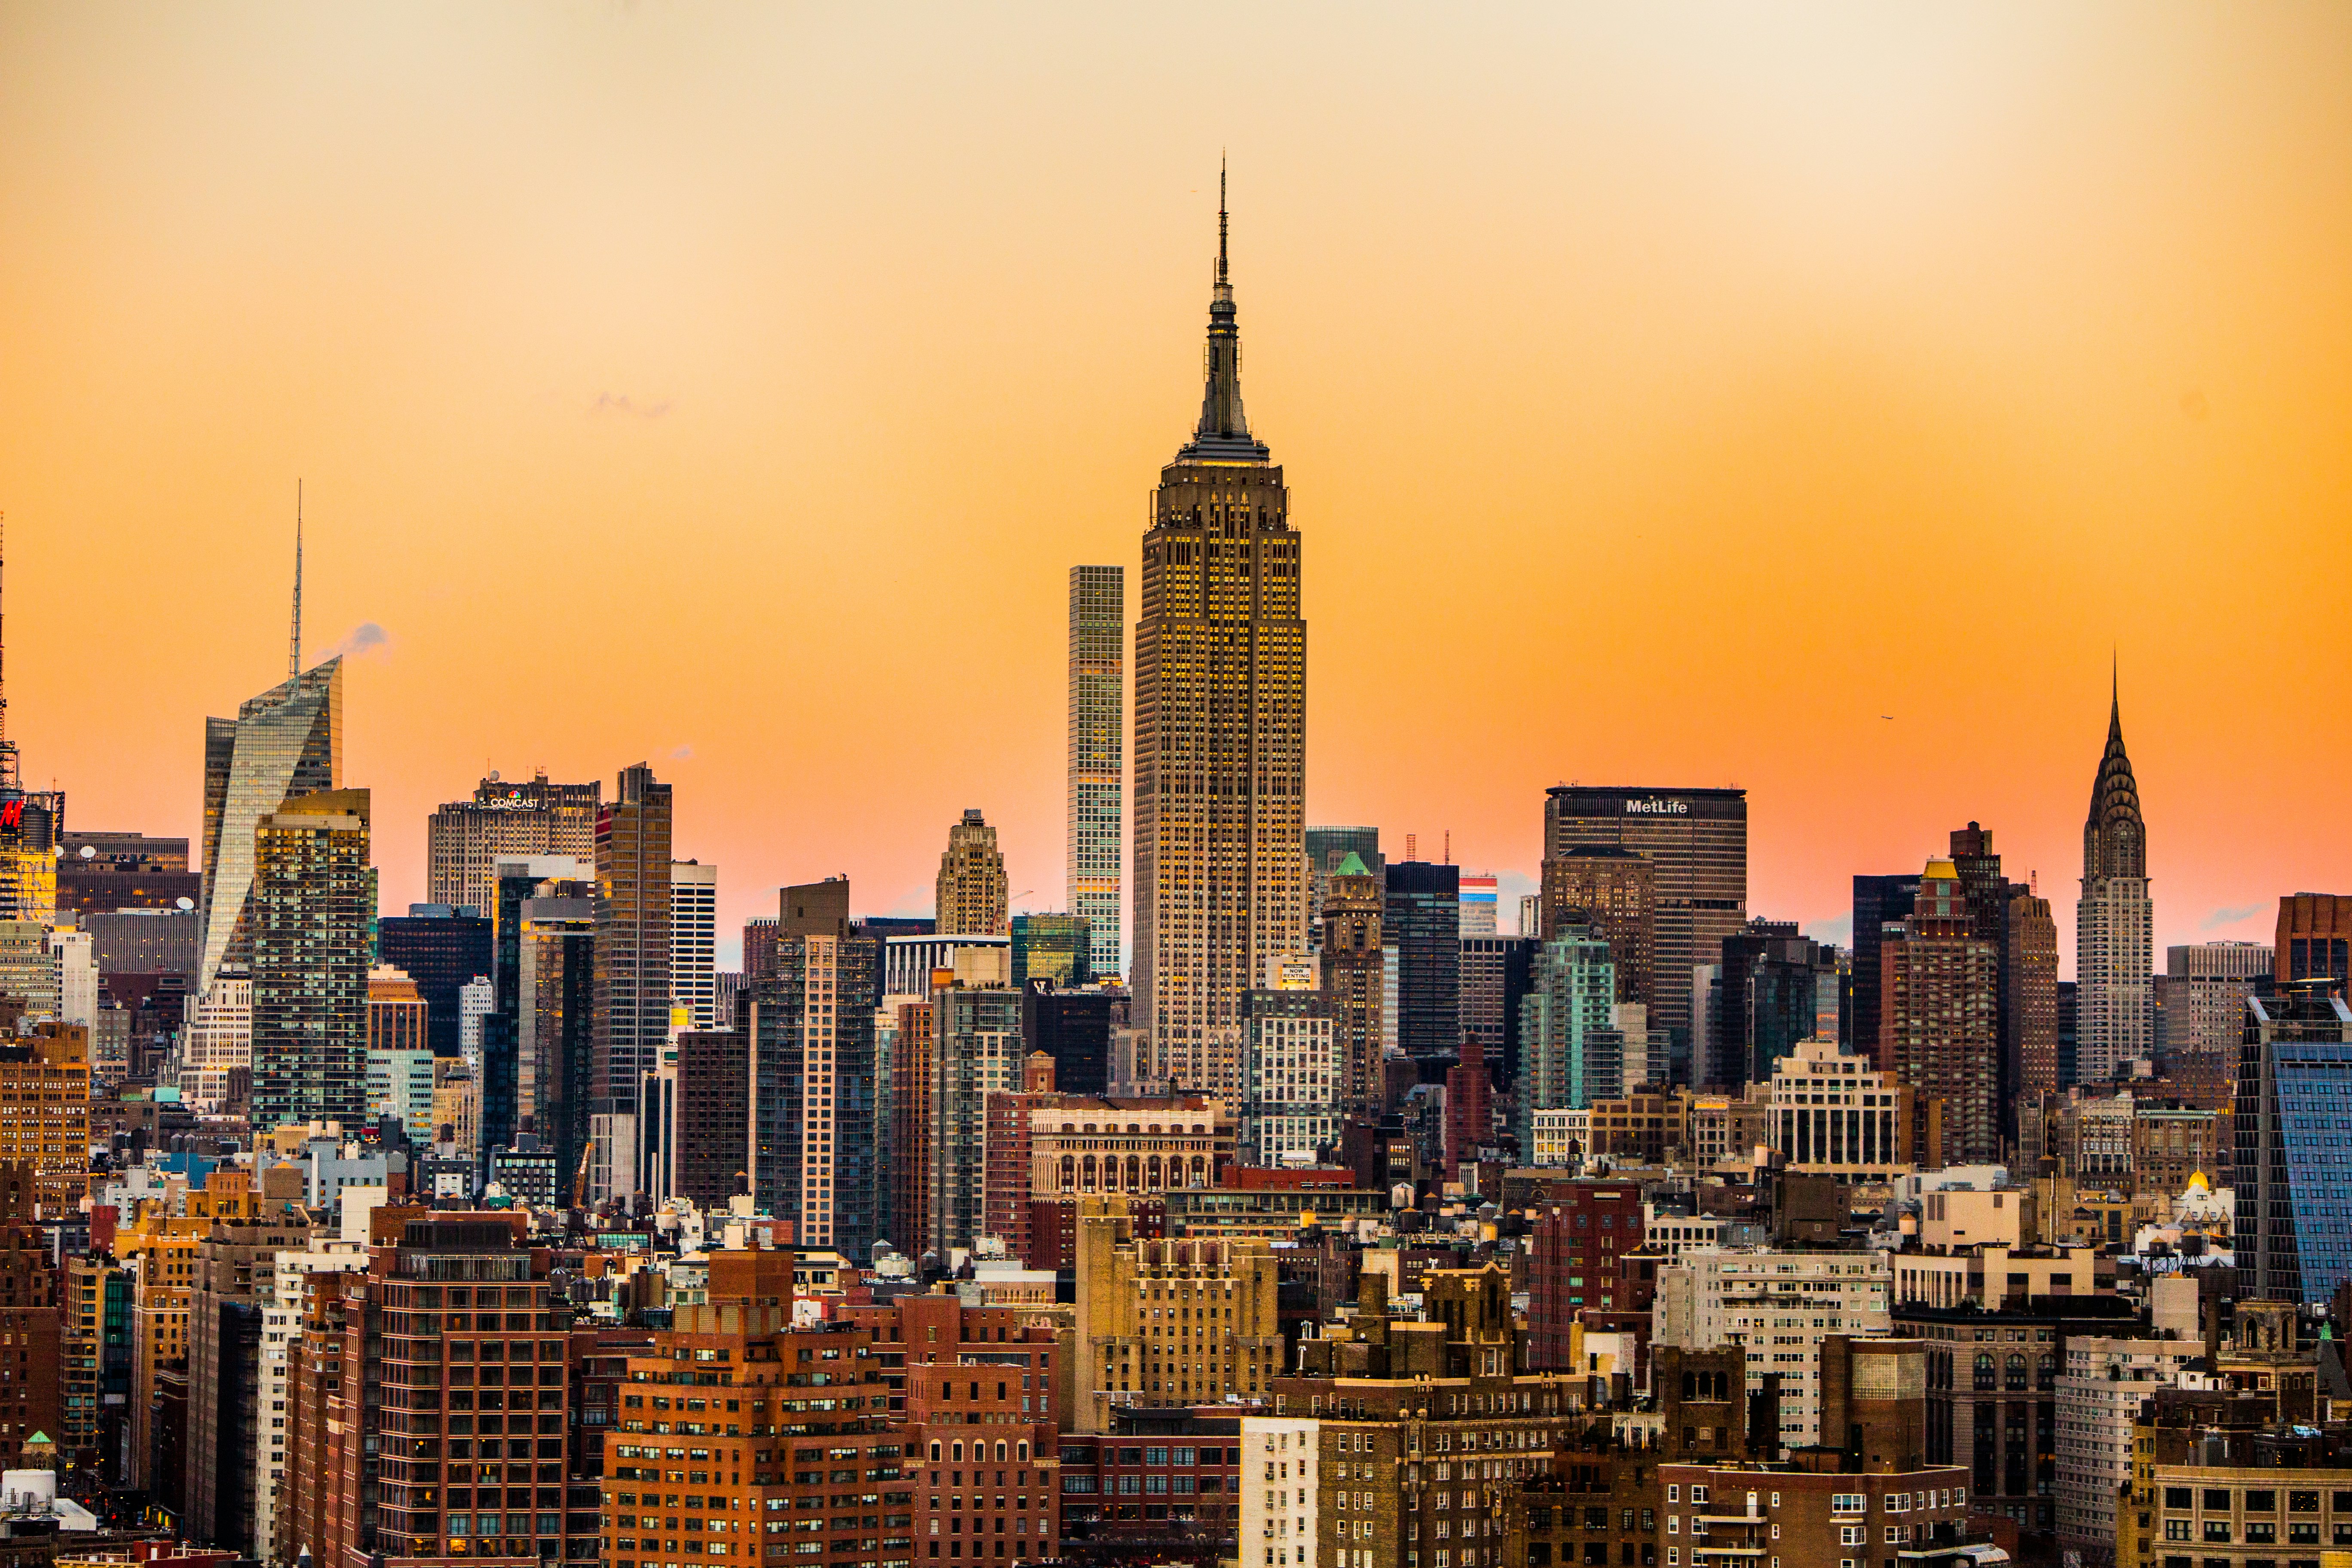 Tech Startups Flocking to New York: What Does it Mean?